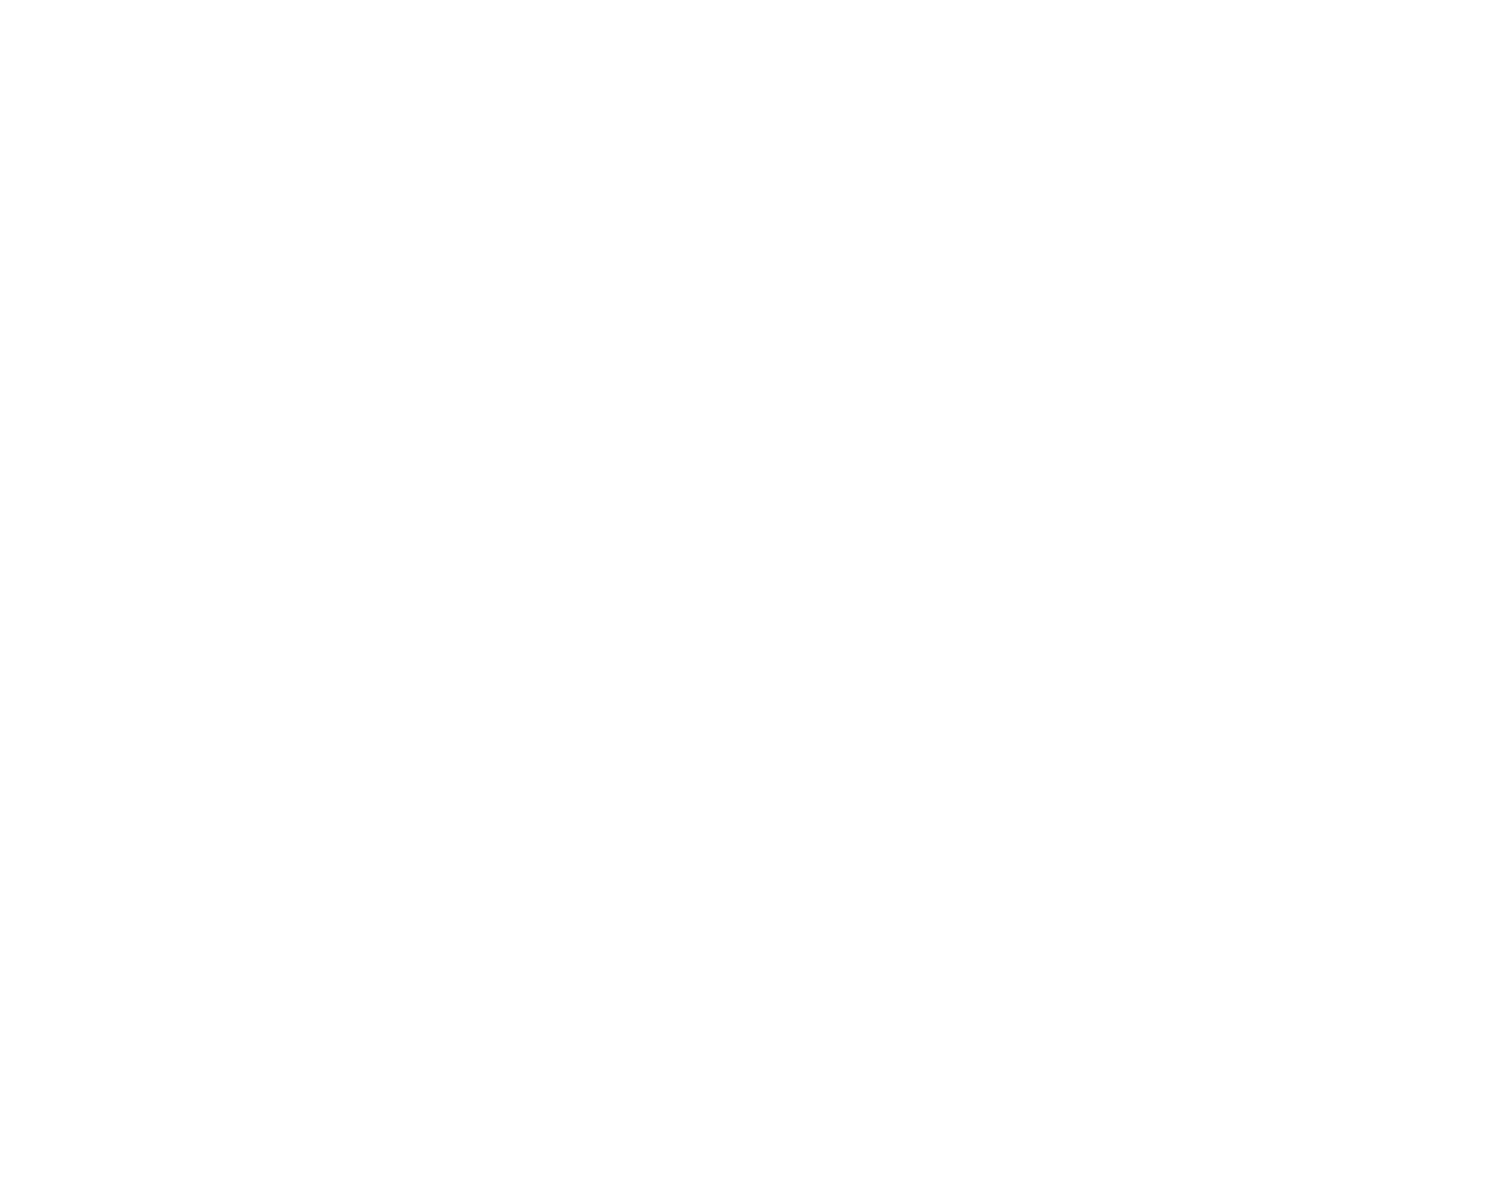 The Radcliffe Pitches